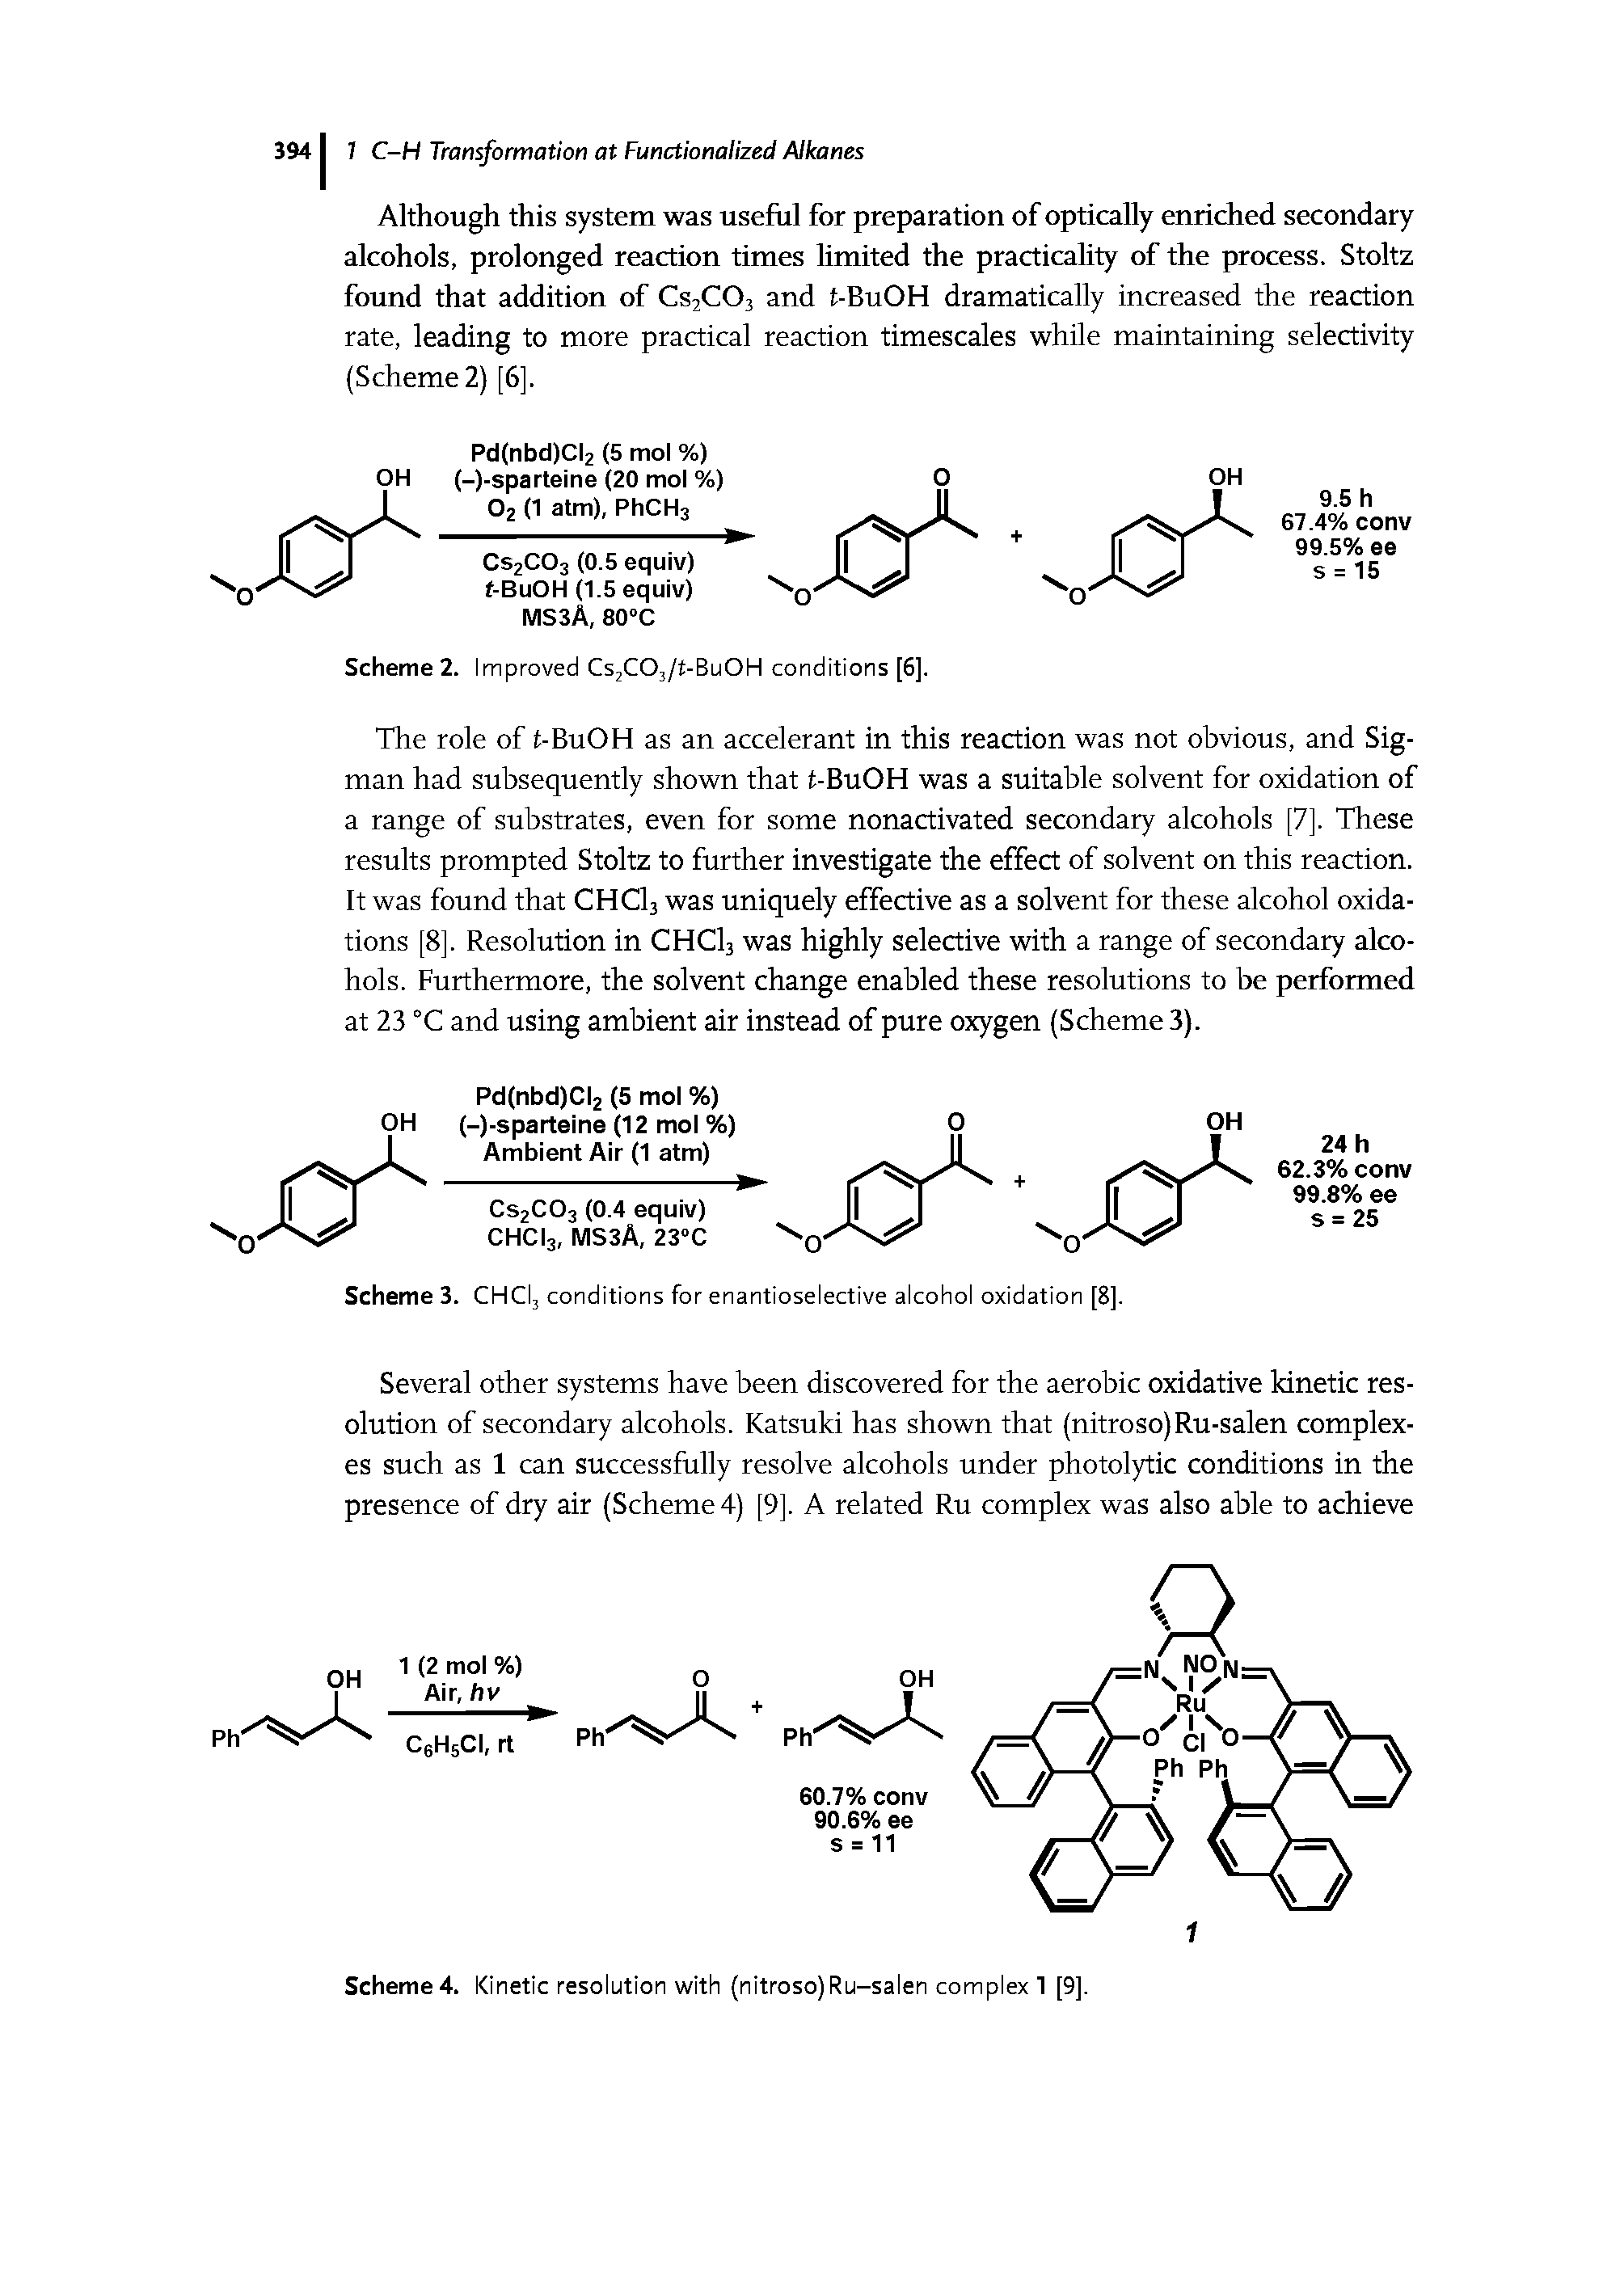 Scheme 3. CHCI3 conditions for enantioselective alcohol oxidation [8].